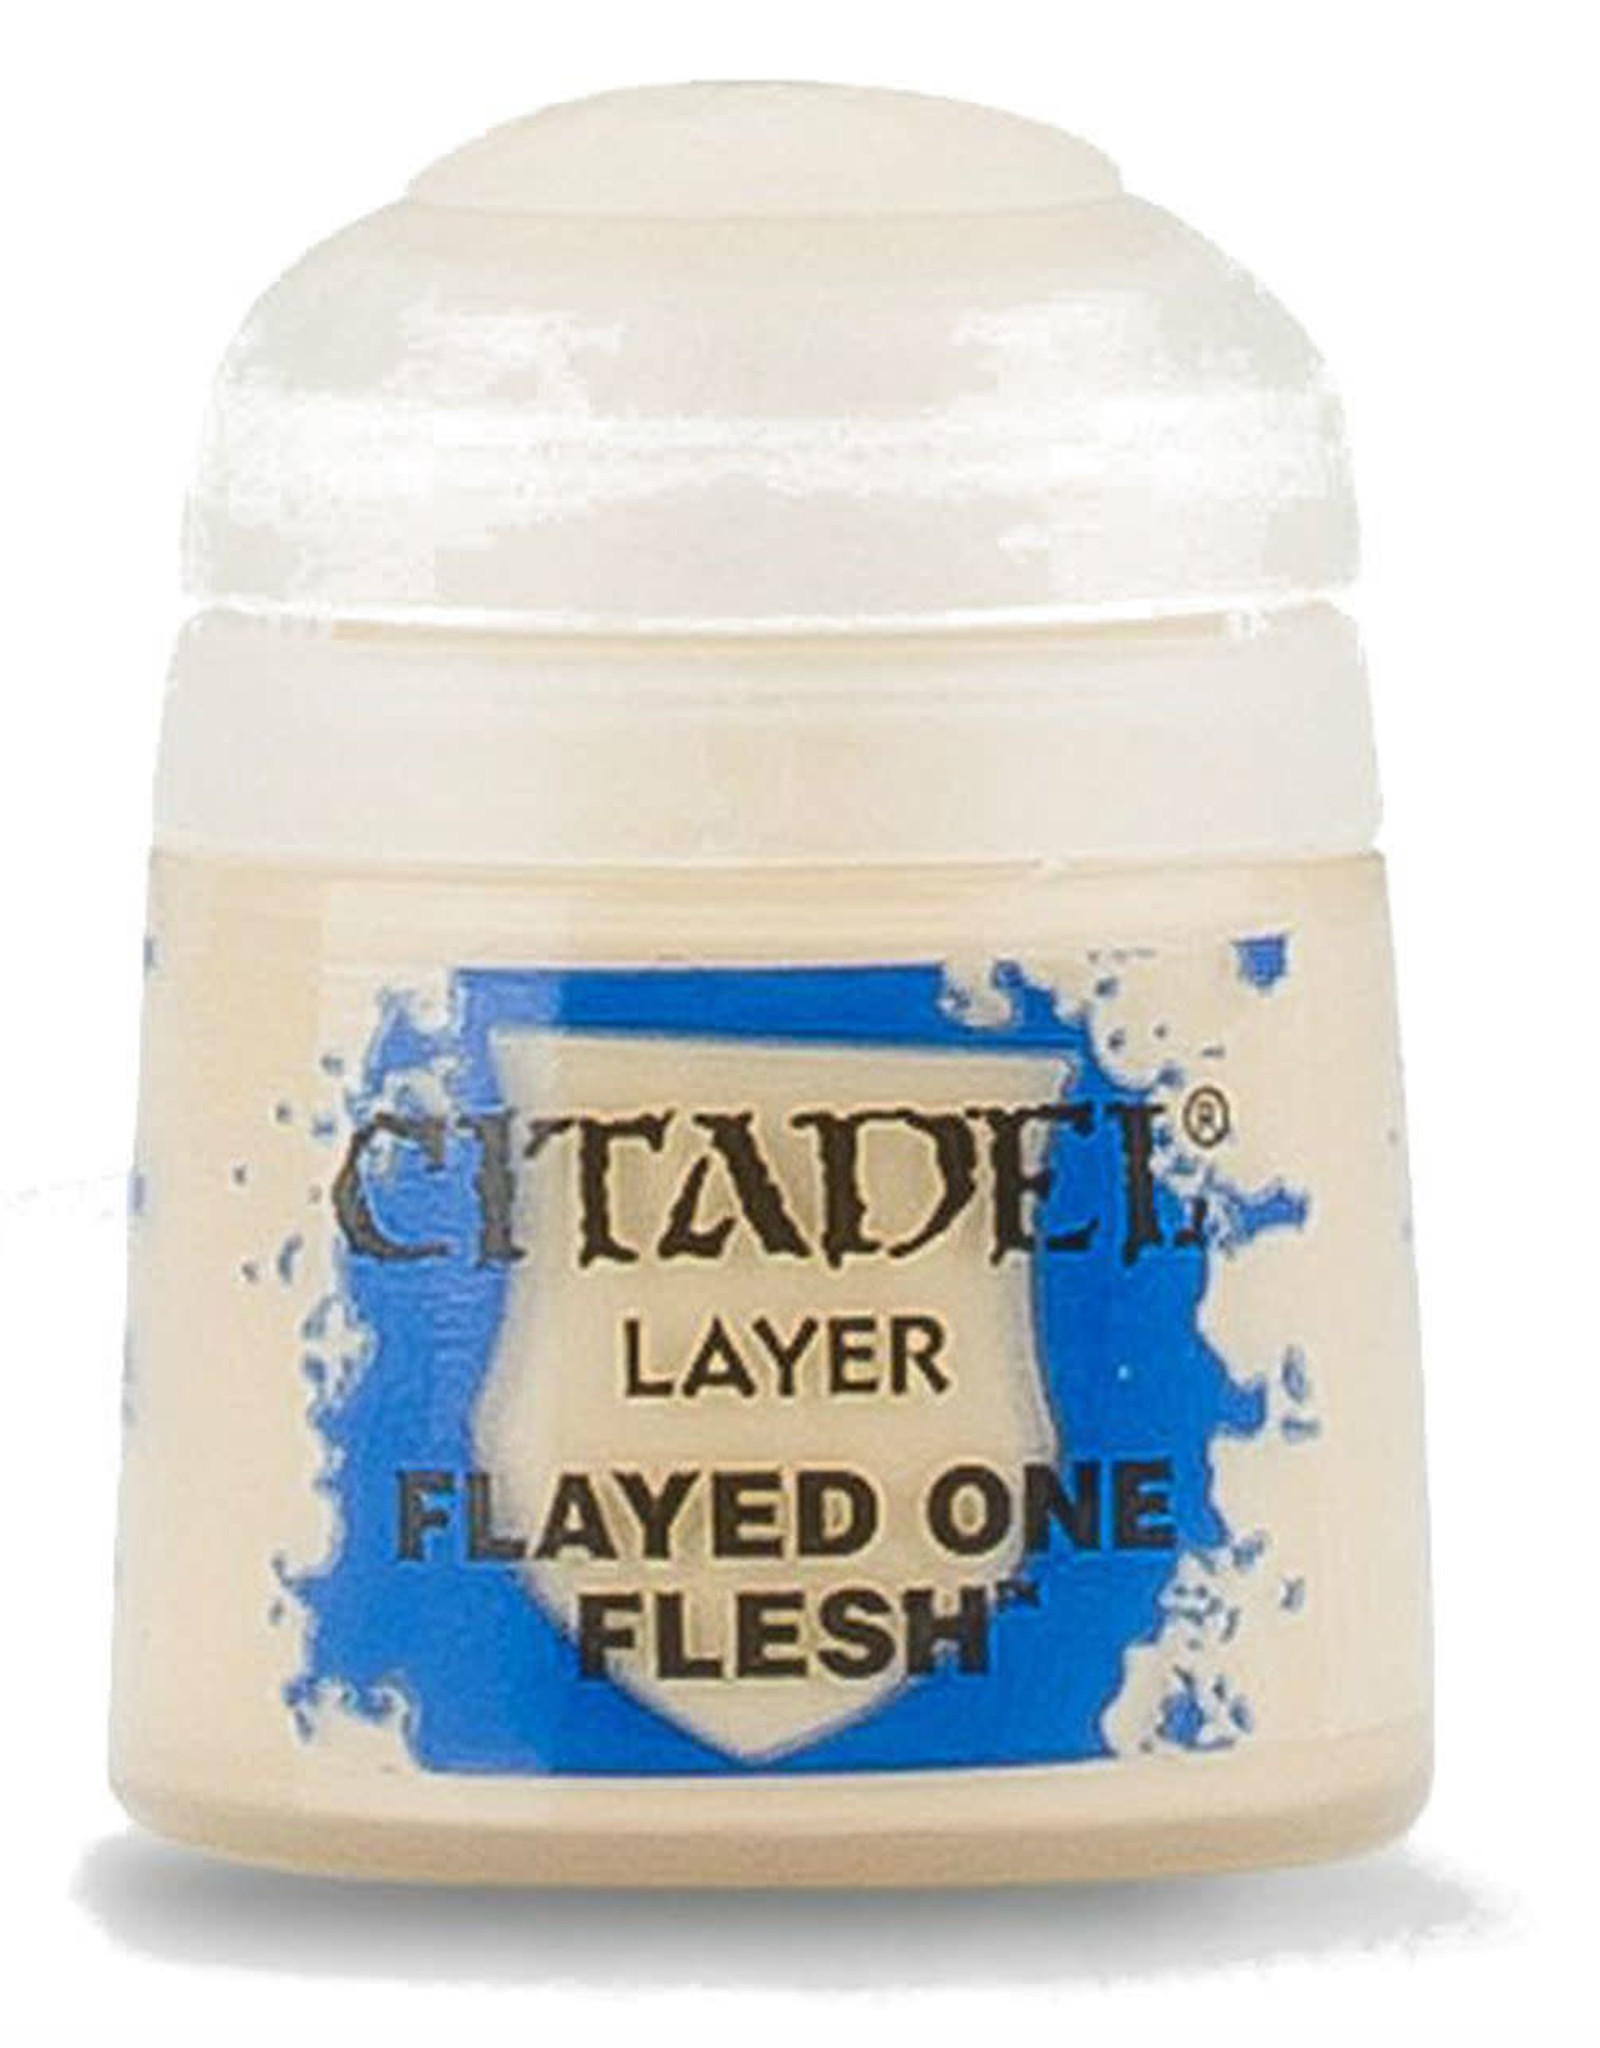 Games Workshop Citadel Paint: Layer - Flayed One Flesh